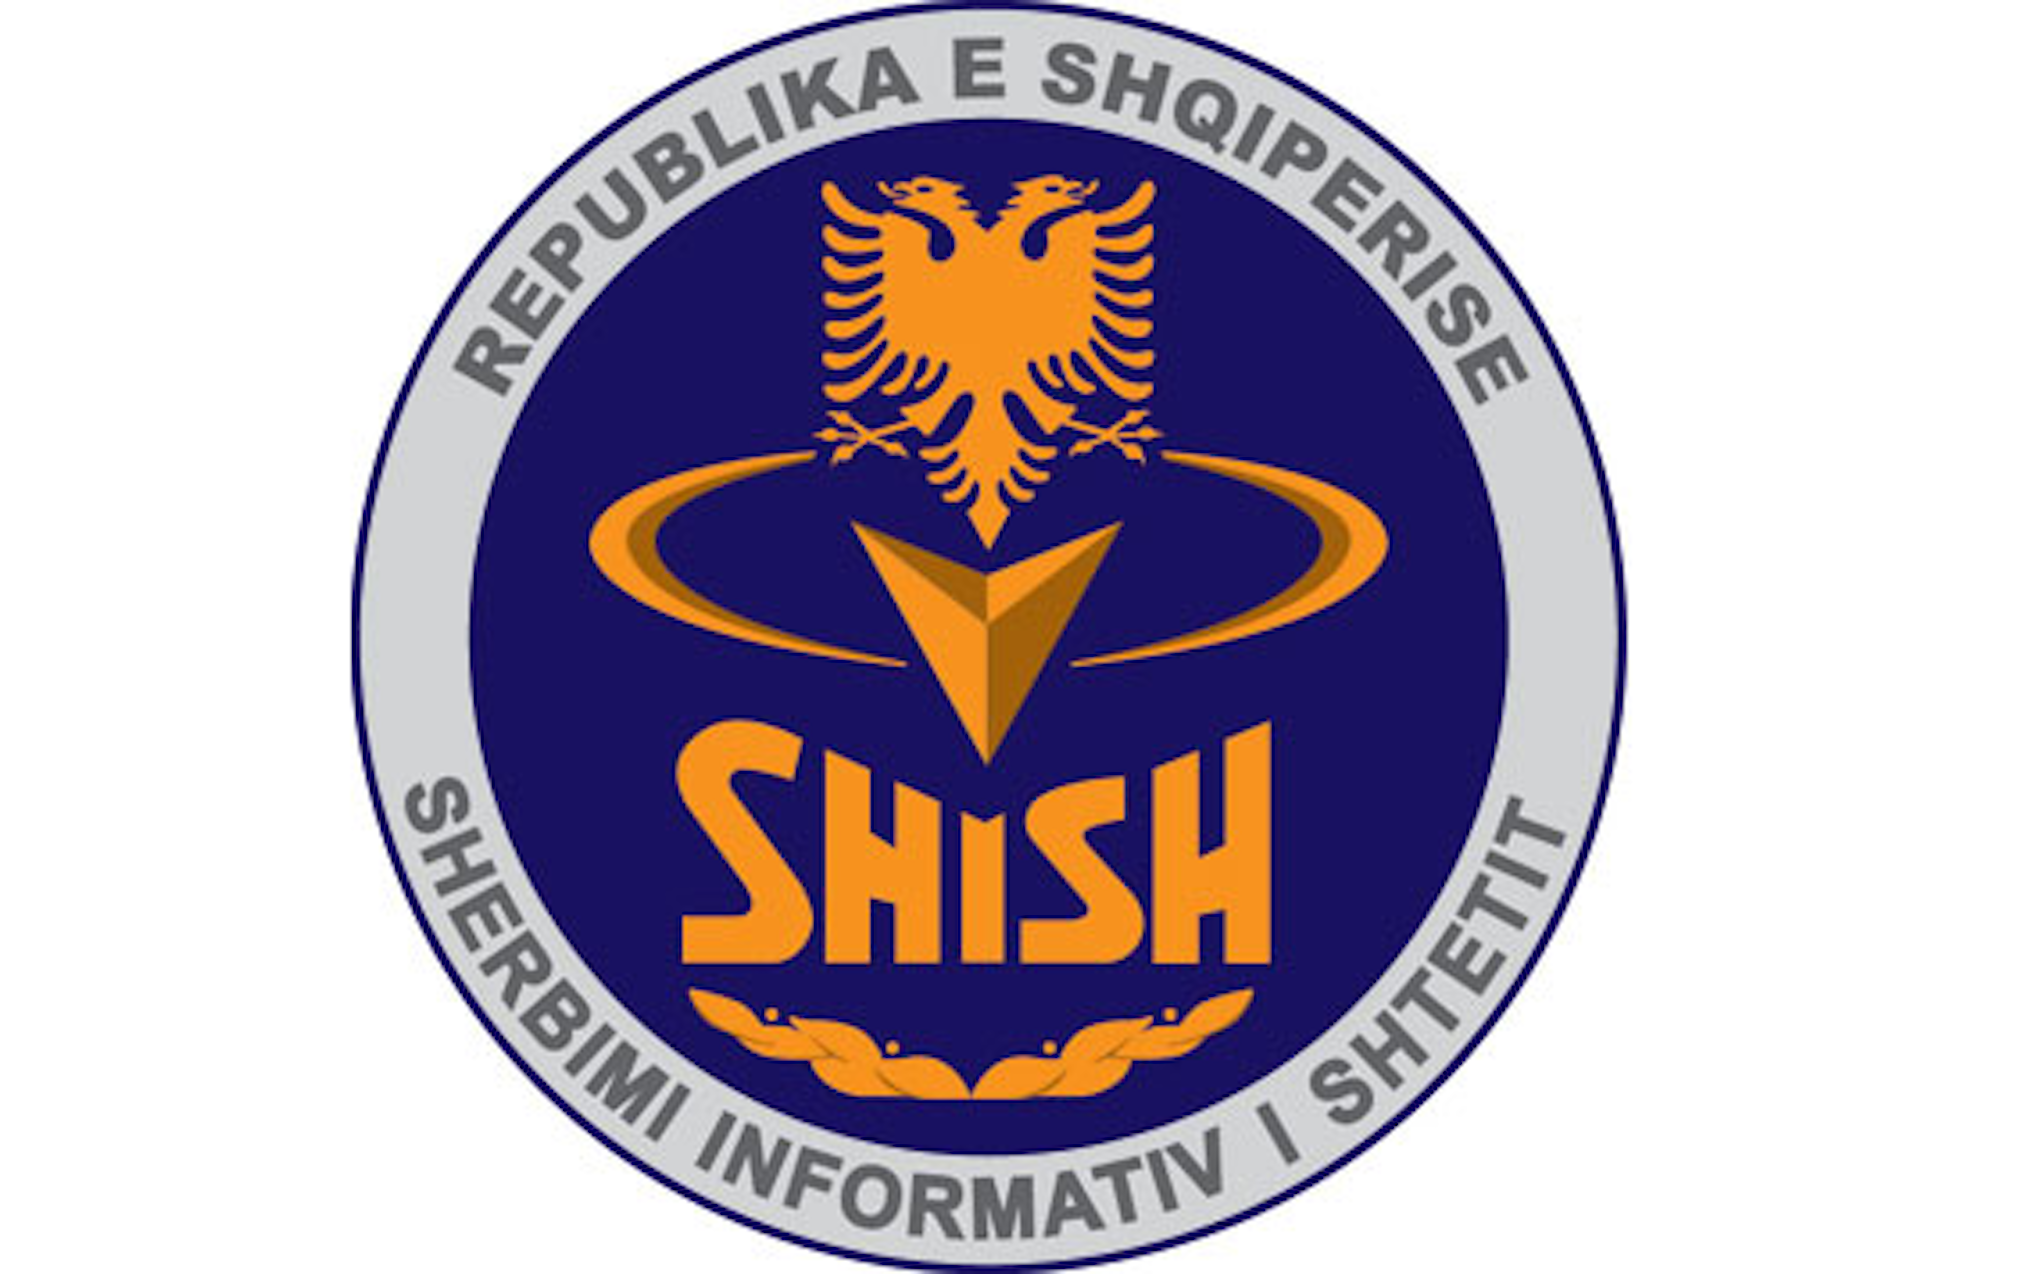 The insignia of Albania’s State Intelligence Service, or SHISH